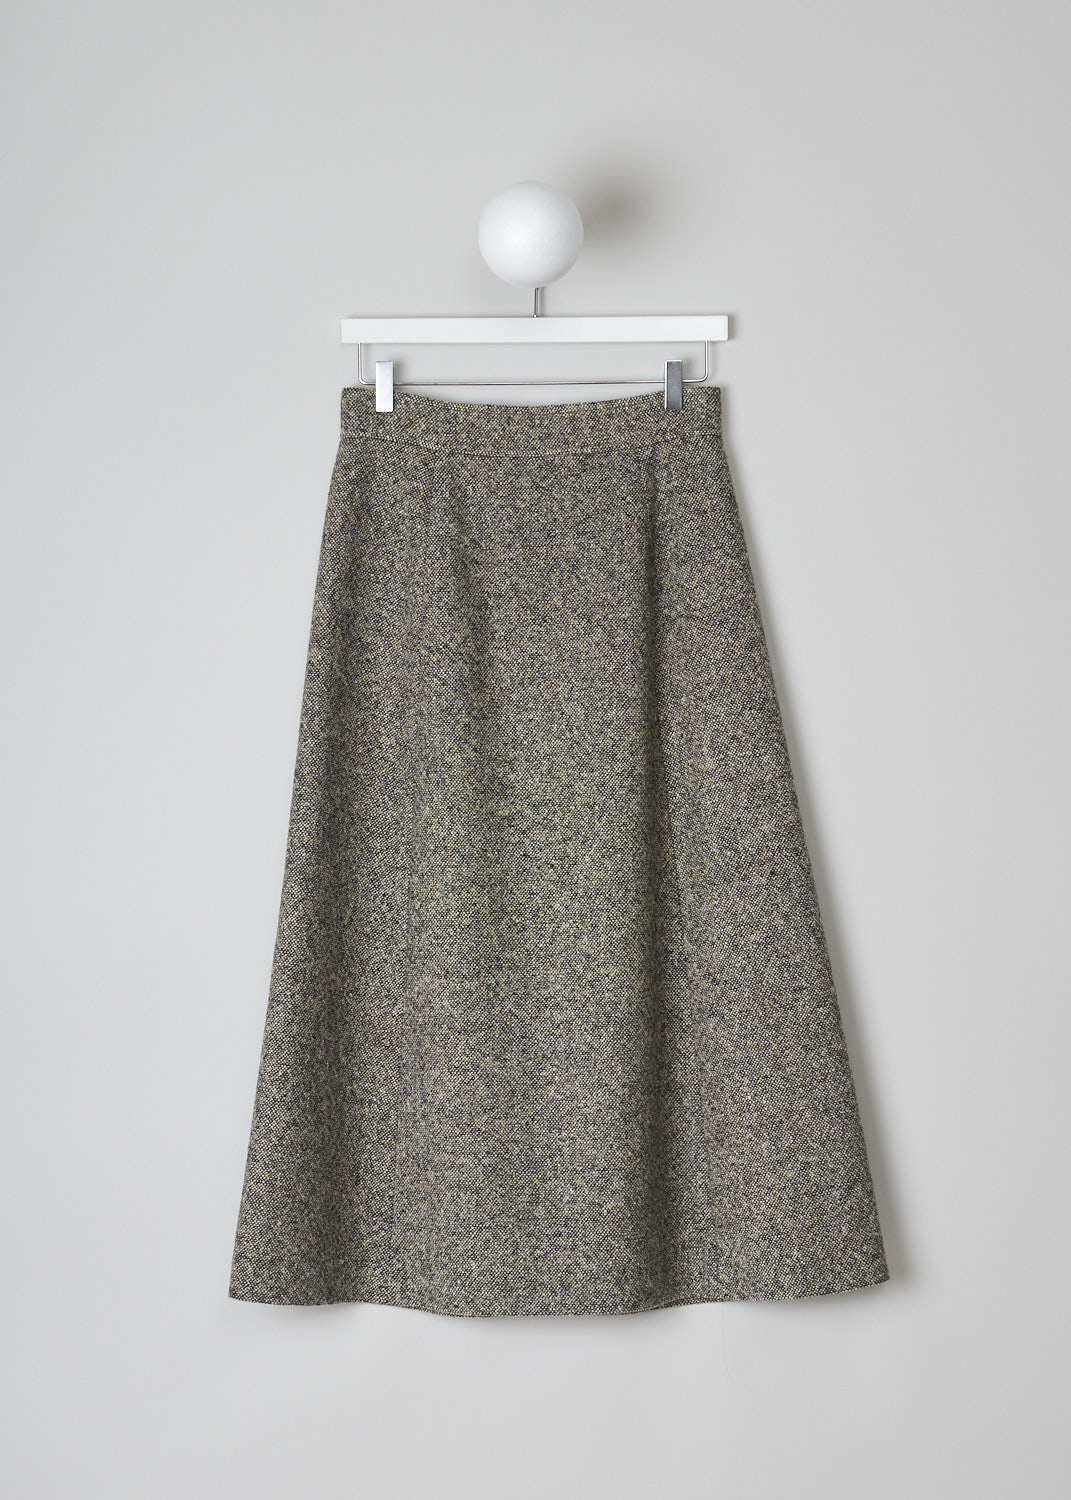 CHLOÃ‰, BUTTONED A-LINE SKIRT IN MAINLY BROWN, CHC21WJU1416522V_MAINLY_BROWN, Brown, Back, This mottled brown A-line midi skirt has a front button closure with ceramic marble buttons in different shades. Concealed slanted pockets can be found in the front. The skirt has a straight hemline. 
